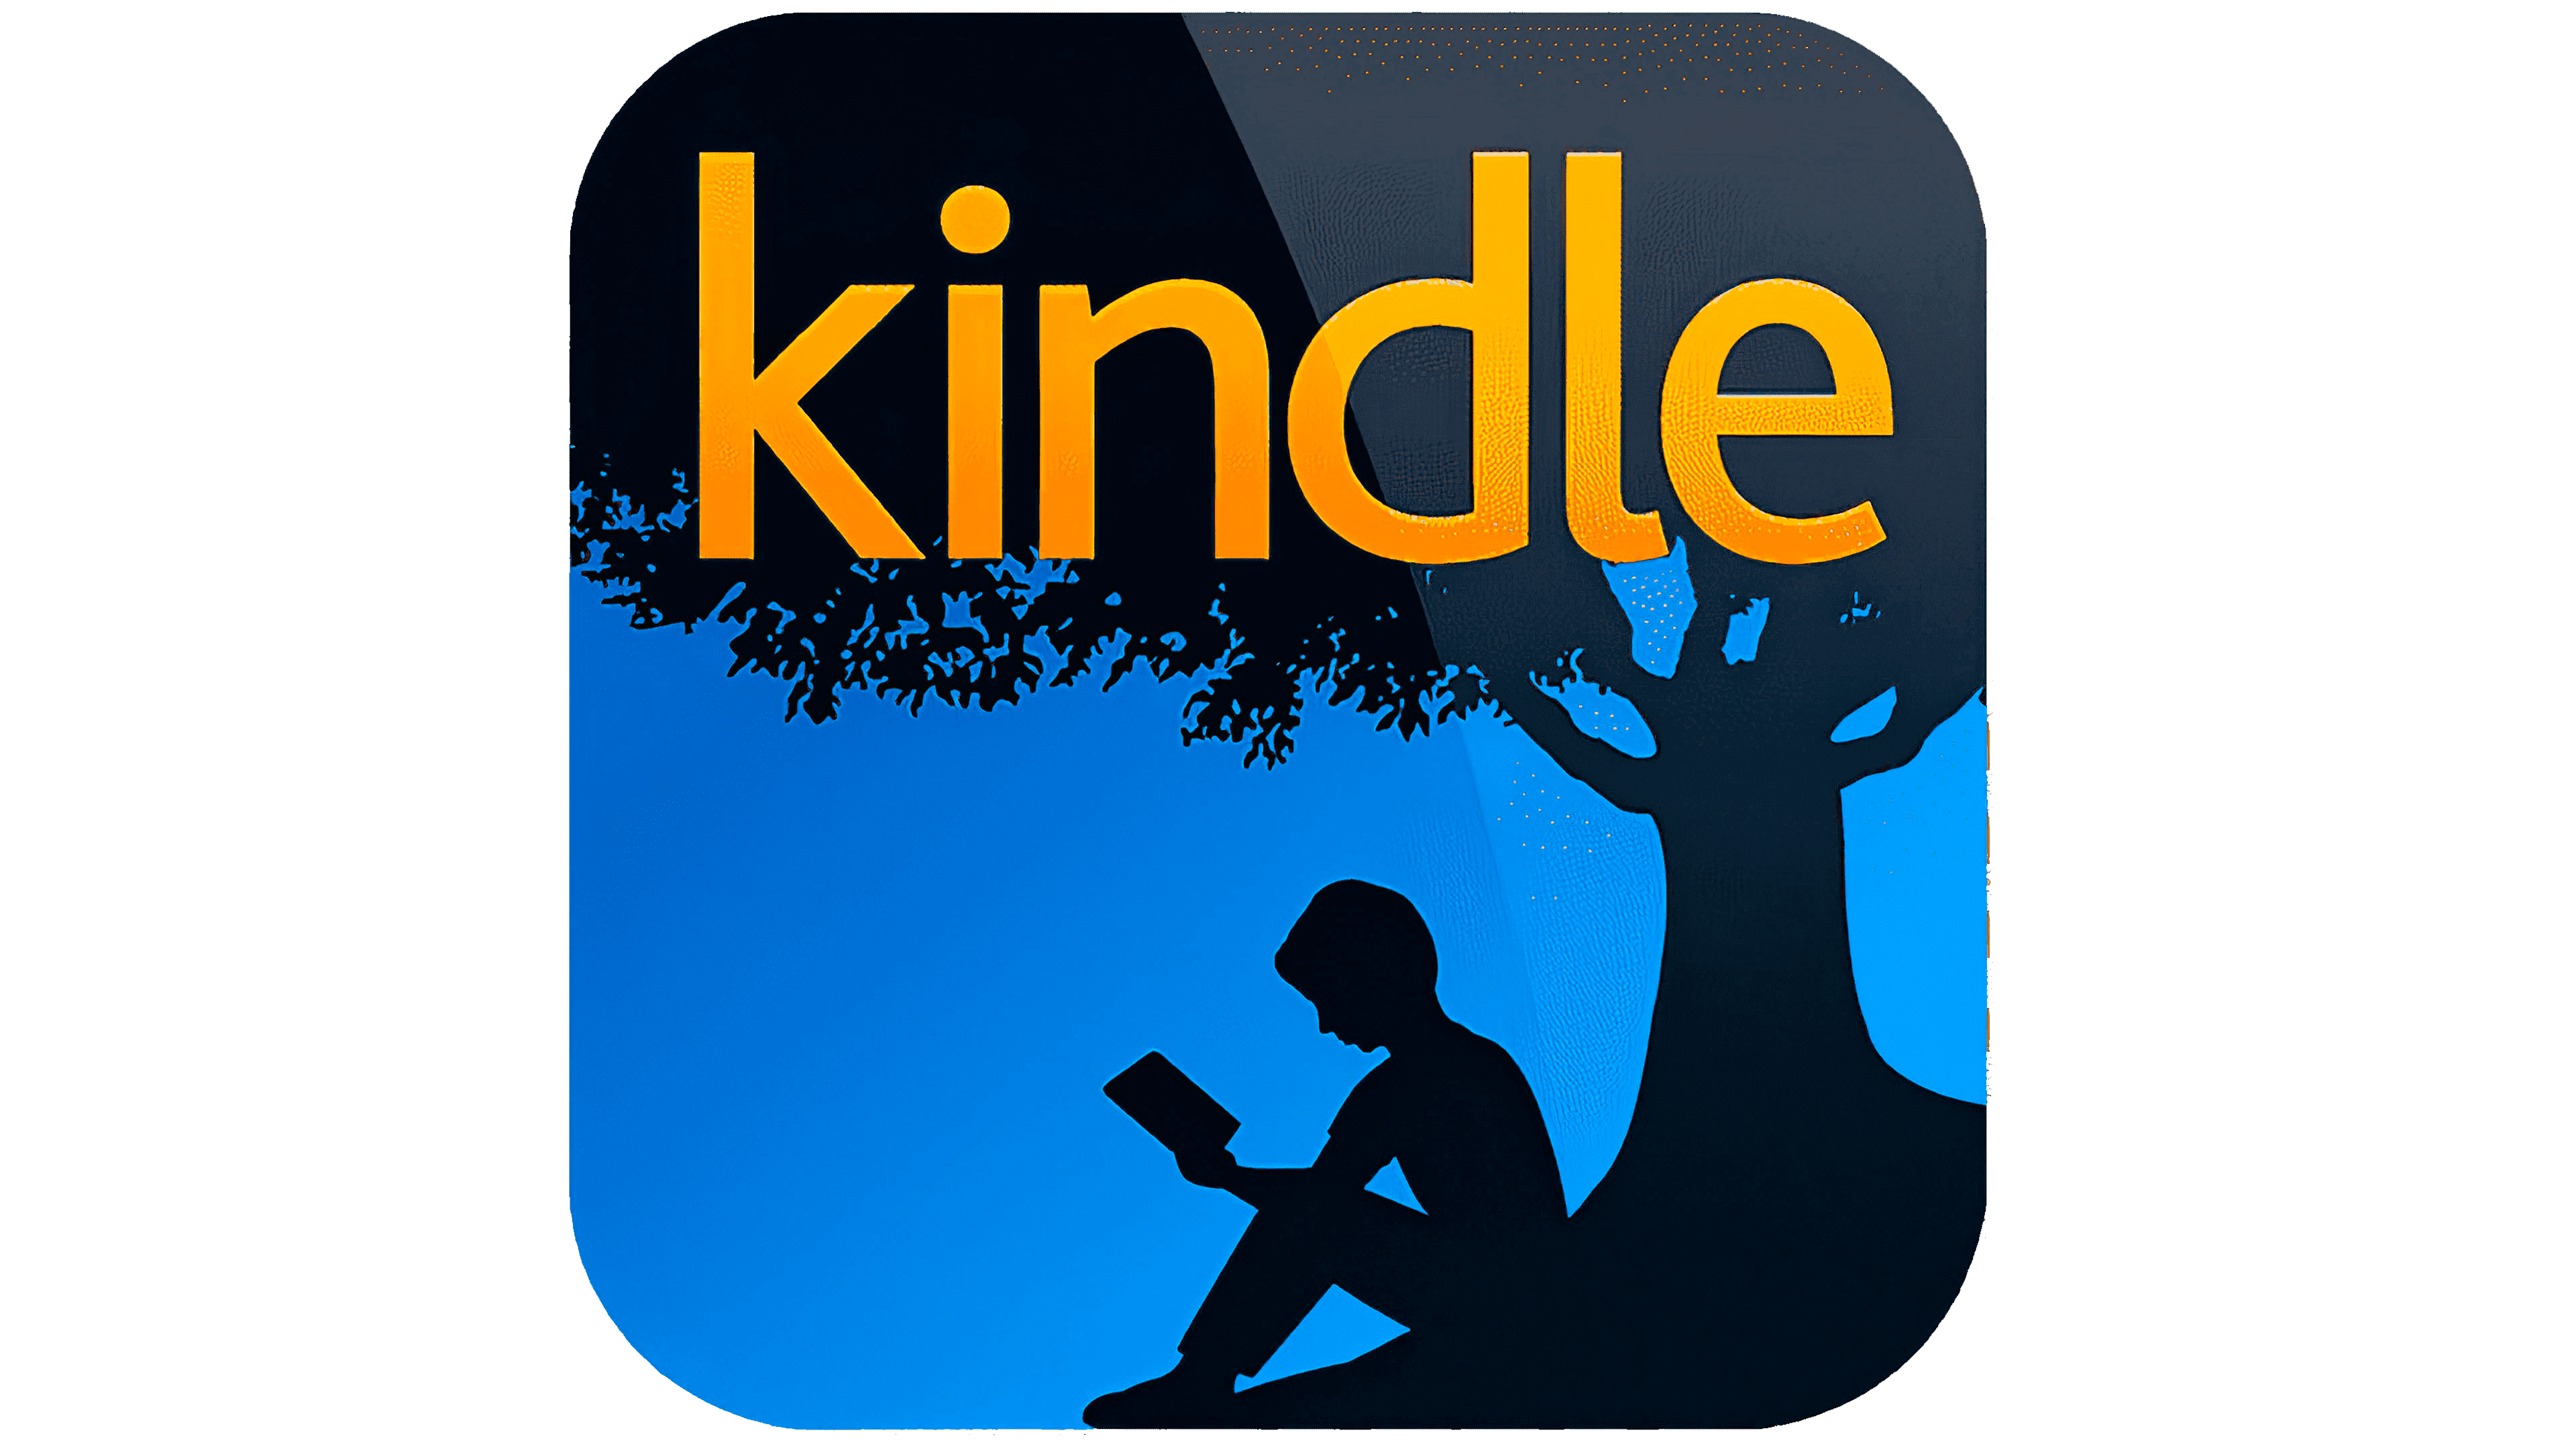 kindle closest meaning